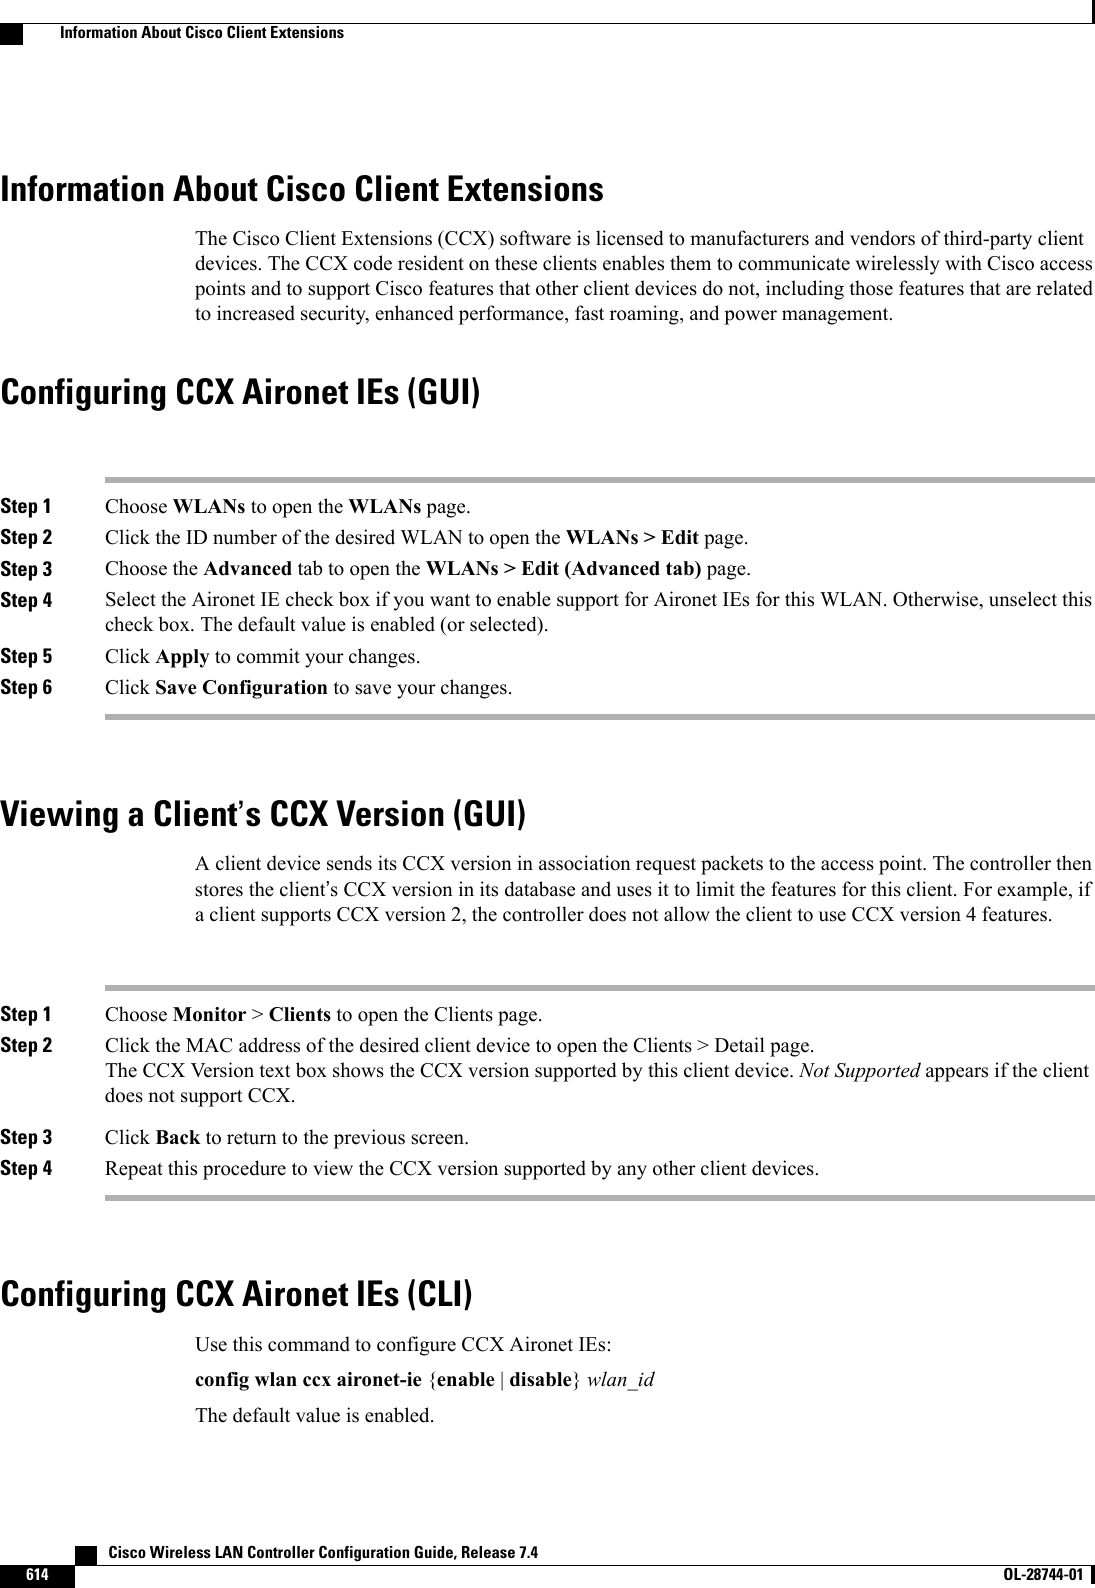 Information About Cisco Client ExtensionsThe Cisco Client Extensions (CCX) software is licensed to manufacturers and vendors of third-party clientdevices. The CCX code resident on these clients enables them to communicate wirelessly with Cisco accesspoints and to support Cisco features that other client devices do not, including those features that are relatedto increased security, enhanced performance, fast roaming, and power management.Configuring CCX Aironet IEs (GUI)Step 1 Choose WLANs to open the WLANs page.Step 2 Click the ID number of the desired WLAN to open the WLANs &gt; Edit page.Step 3 Choose the Advanced tab to open the WLANs &gt; Edit (Advanced tab) page.Step 4 Select the Aironet IE check box if you want to enable support for Aironet IEs for this WLAN. Otherwise, unselect thischeck box. The default value is enabled (or selected).Step 5 Click Apply to commit your changes.Step 6 Click Save Configuration to save your changes.Viewing a Client’s CCX Version (GUI)A client device sends its CCX version in association request packets to the access point. The controller thenstores the client’s CCX version in its database and uses it to limit the features for this client. For example, ifa client supports CCX version 2, the controller does not allow the client to use CCX version 4 features.Step 1 Choose Monitor &gt;Clients to open the Clients page.Step 2 Click the MAC address of the desired client device to open the Clients &gt; Detail page.The CCX Version text box shows the CCX version supported by this client device. Not Supported appears if the clientdoes not support CCX.Step 3 Click Back to return to the previous screen.Step 4 Repeat this procedure to view the CCX version supported by any other client devices.Configuring CCX Aironet IEs (CLI)Use this command to configure CCX Aironet IEs:config wlan ccx aironet-ie {enable |disable}wlan_idThe default value is enabled.   Cisco Wireless LAN Controller Configuration Guide, Release 7.4614 OL-28744-01  Information About Cisco Client Extensions